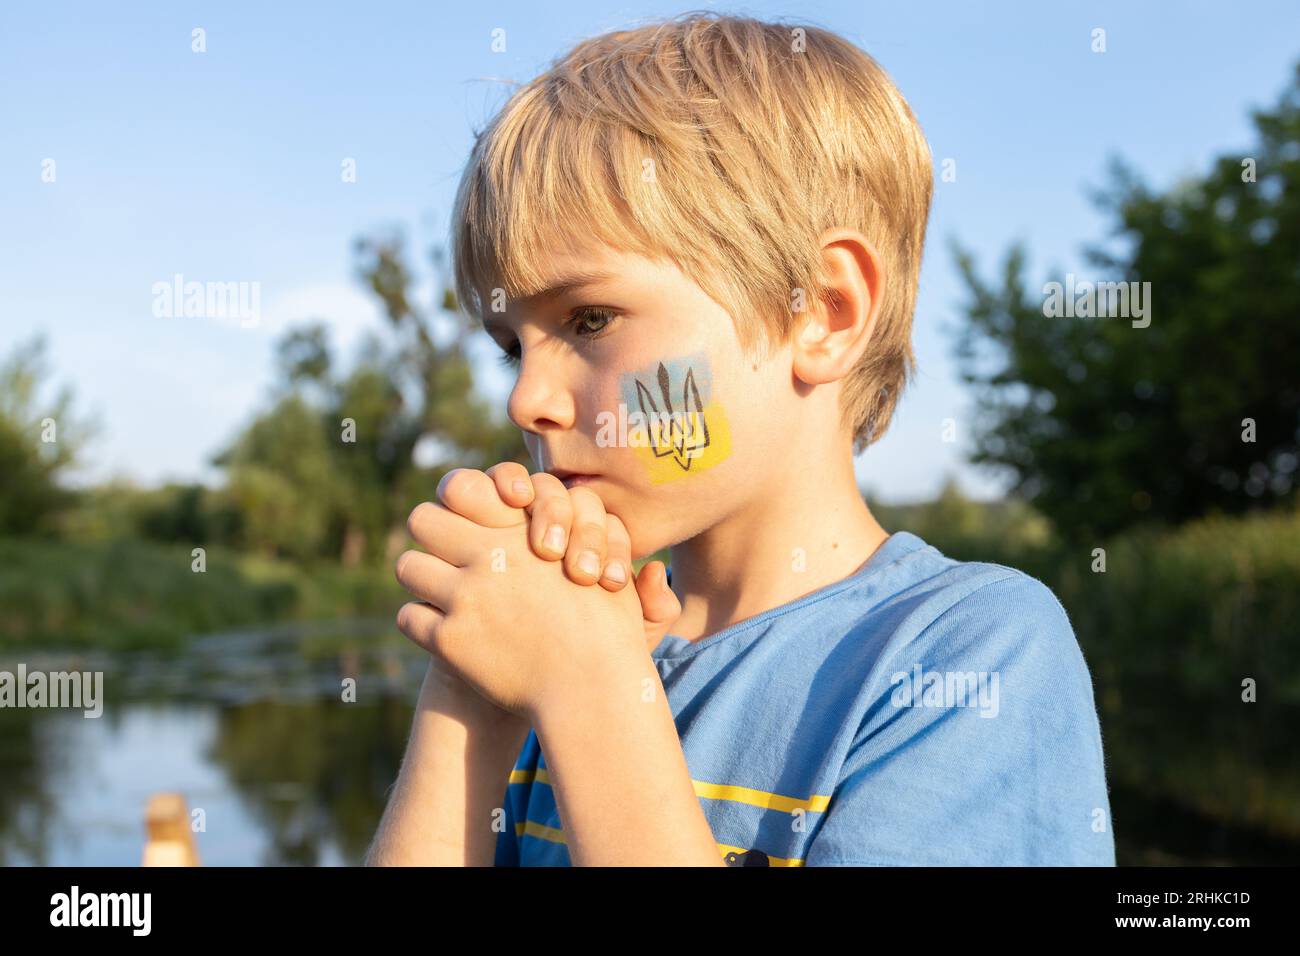 unhappy sad boy with a painted trident on his cheek Stock Photo